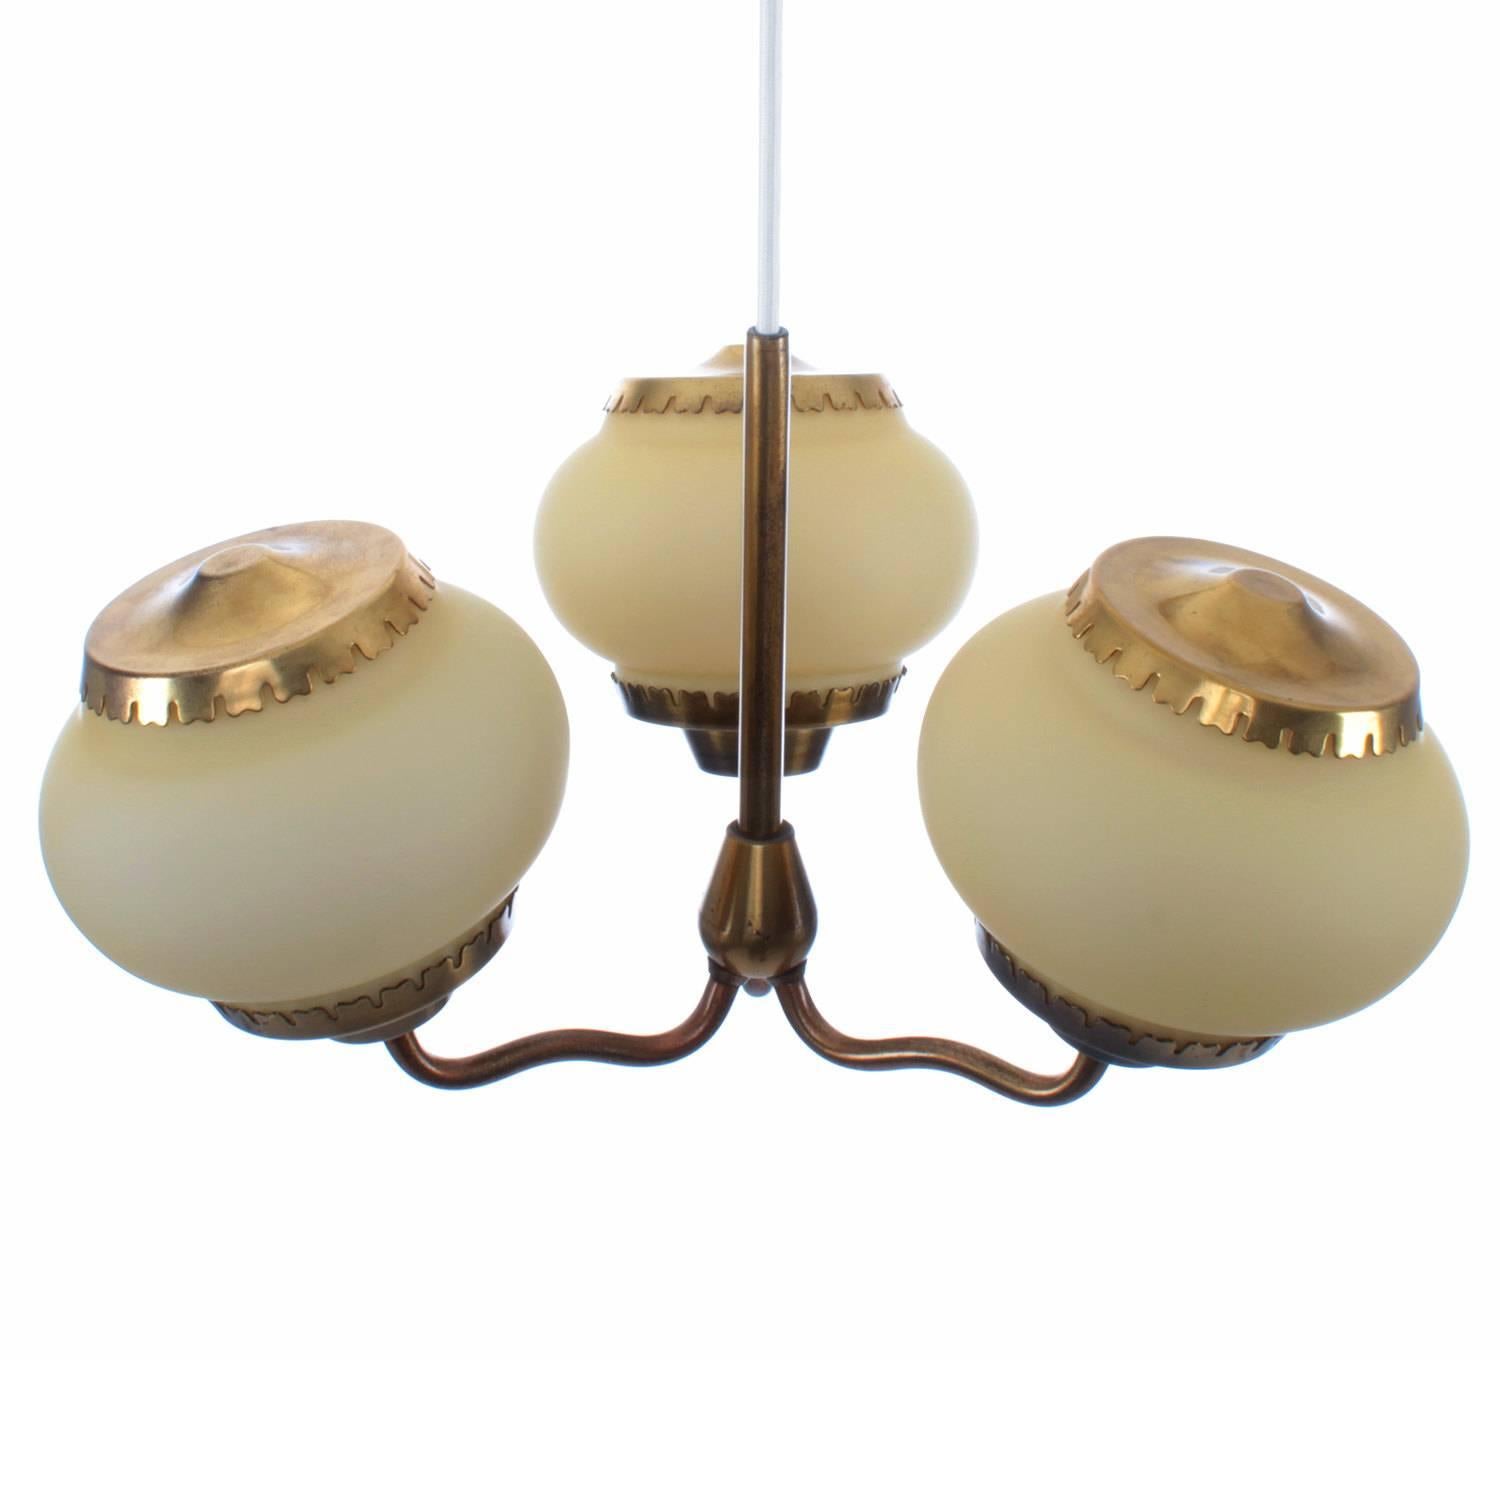 Danish Three-Light Chandelier, Opal and Brass by Bent Karlby for Lyfa, 1940s For Sale